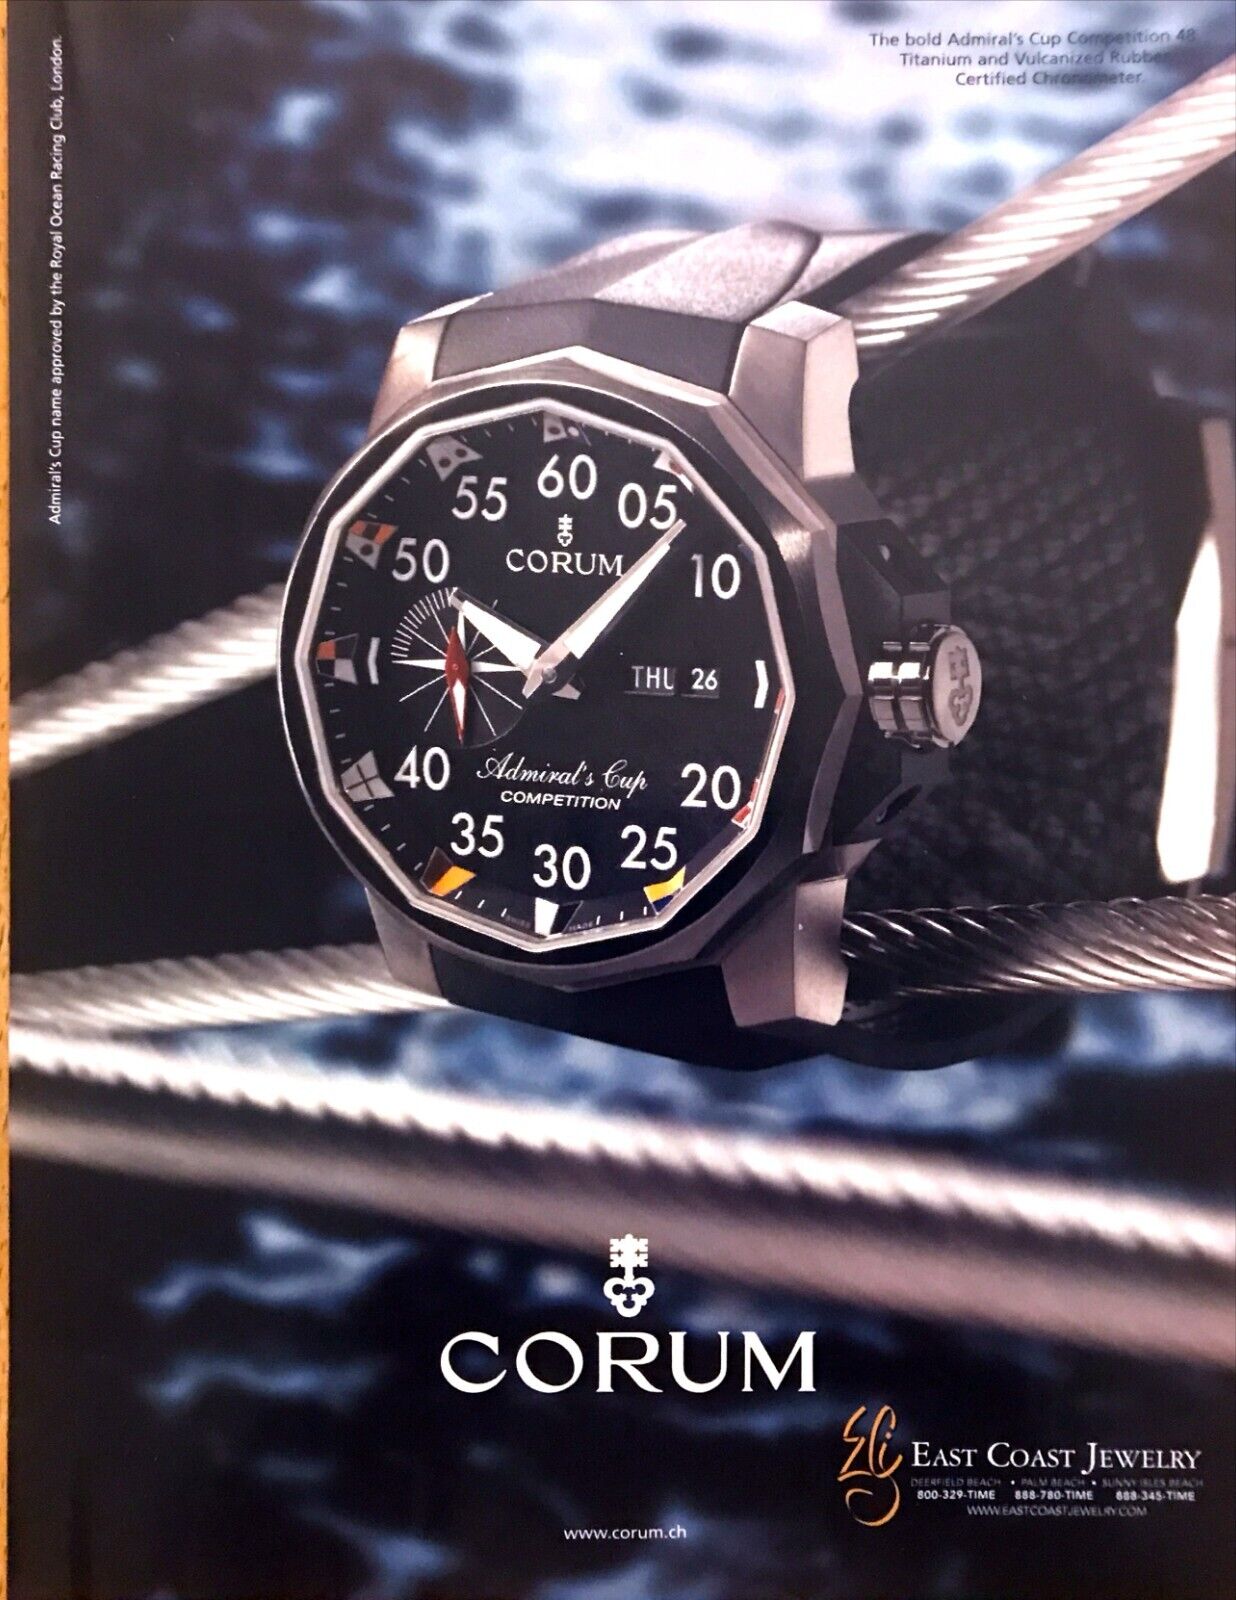 2006 Corum Admiral\'s Cup Competition 48 Chronometer Watch photo vintage print ad